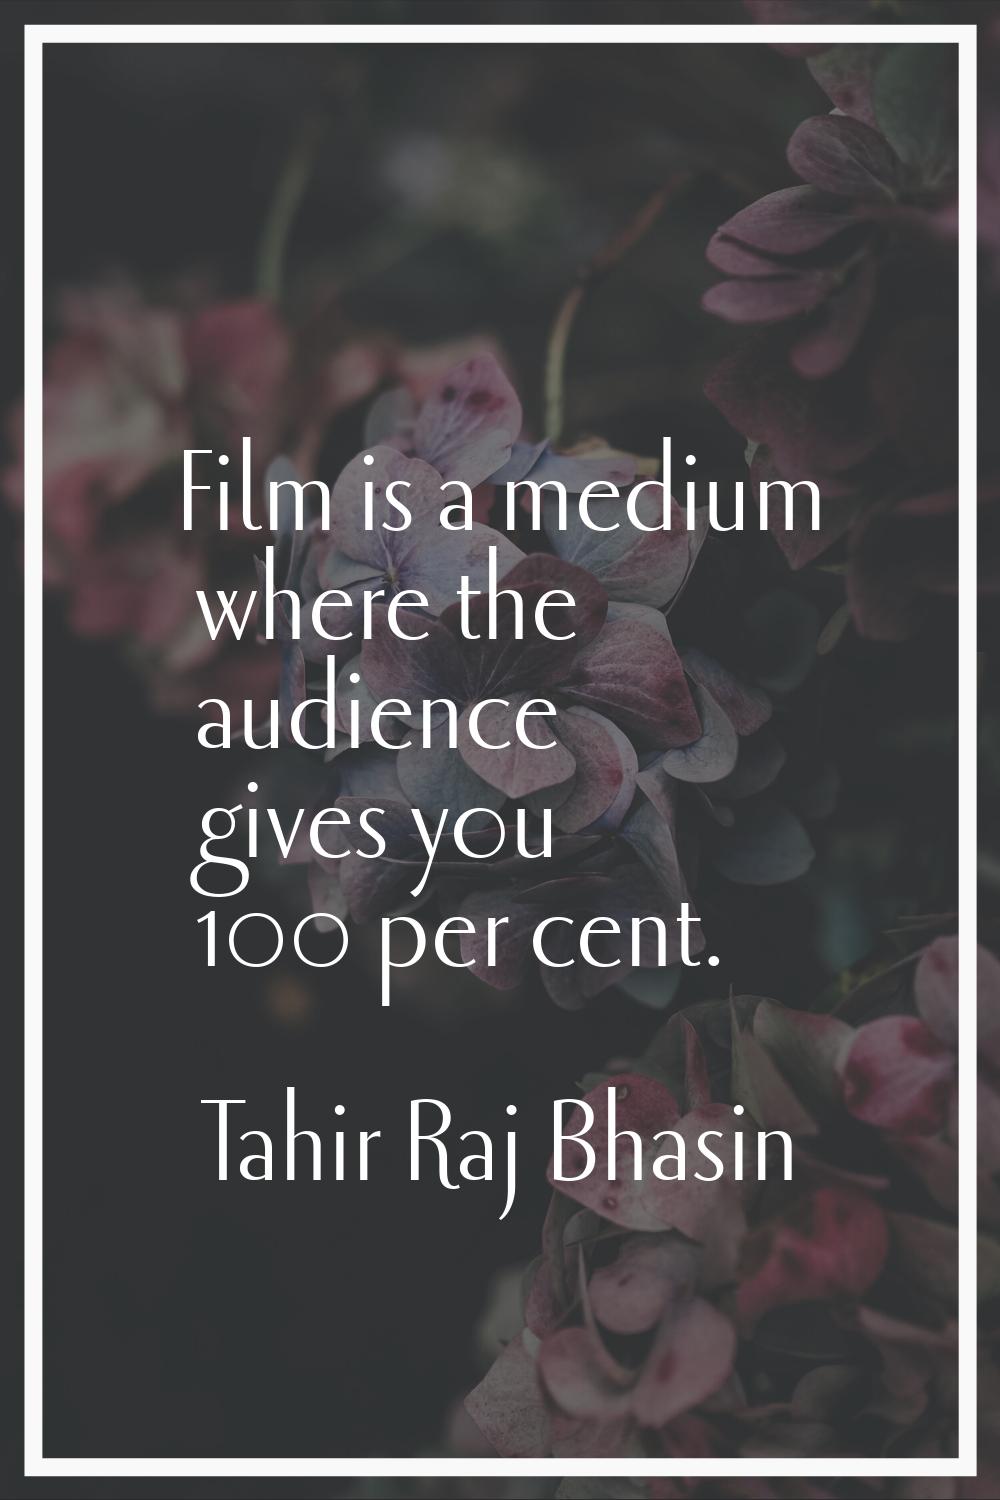 Film is a medium where the audience gives you 100 per cent.